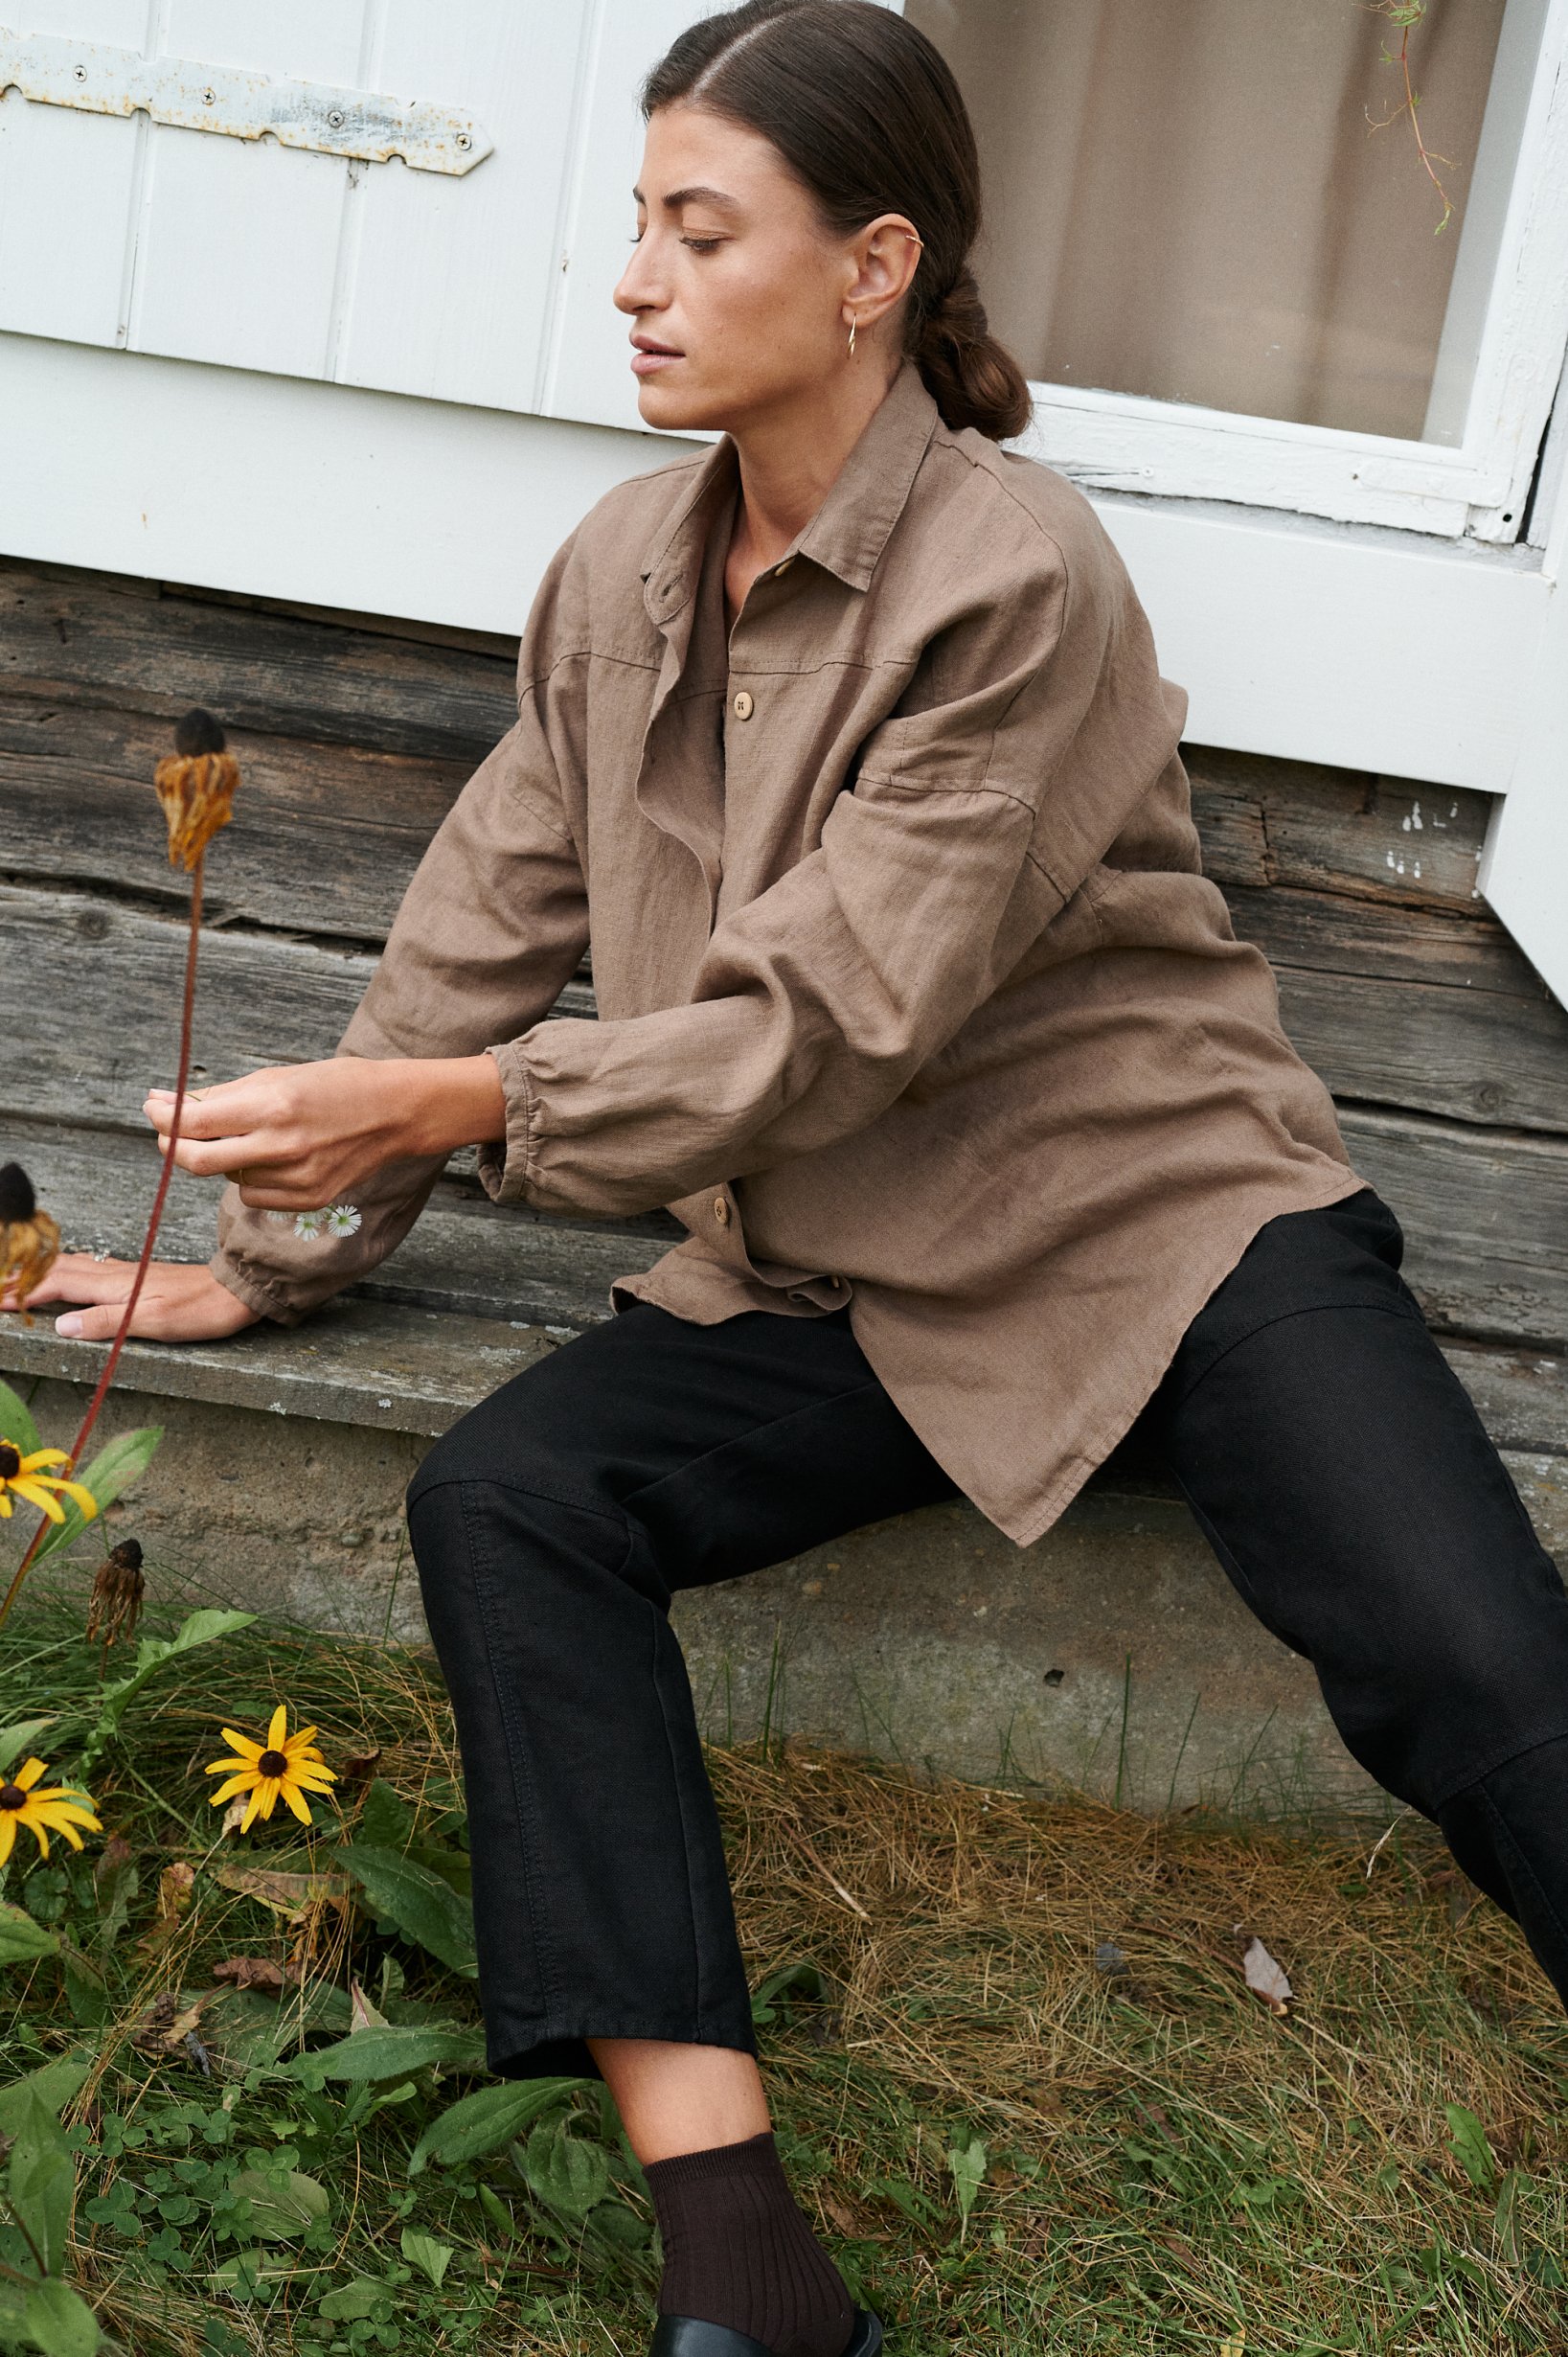 A woman sitting in loose-fitting linen brown button down